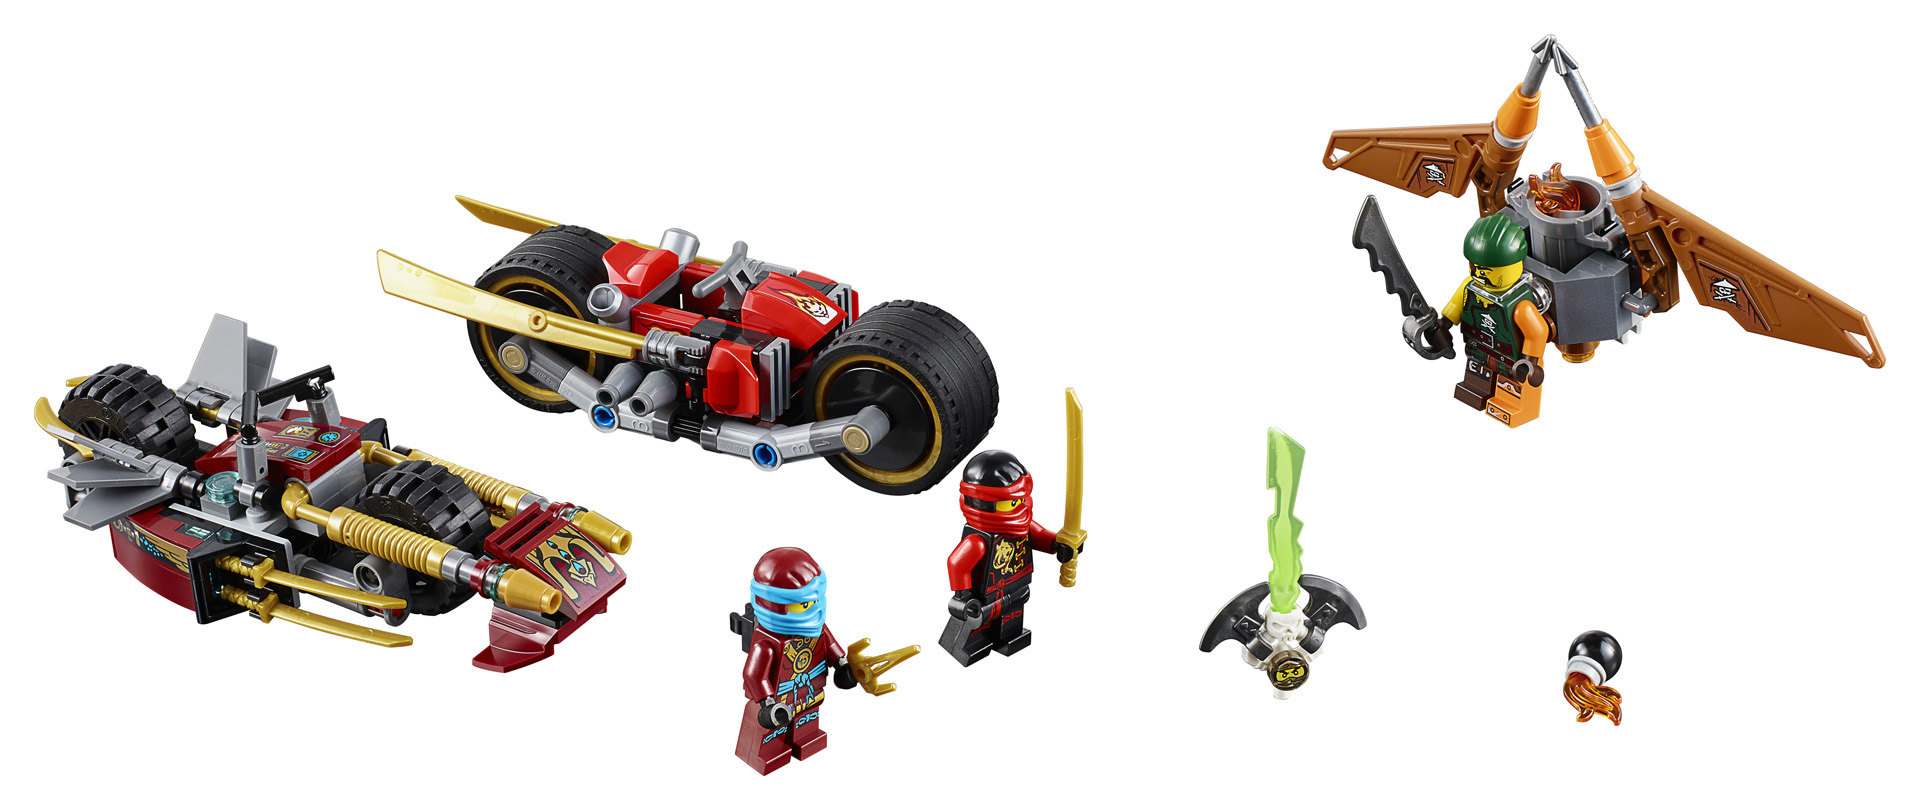 LEGO Ninjago Takes To The Skies With 7 New Sets